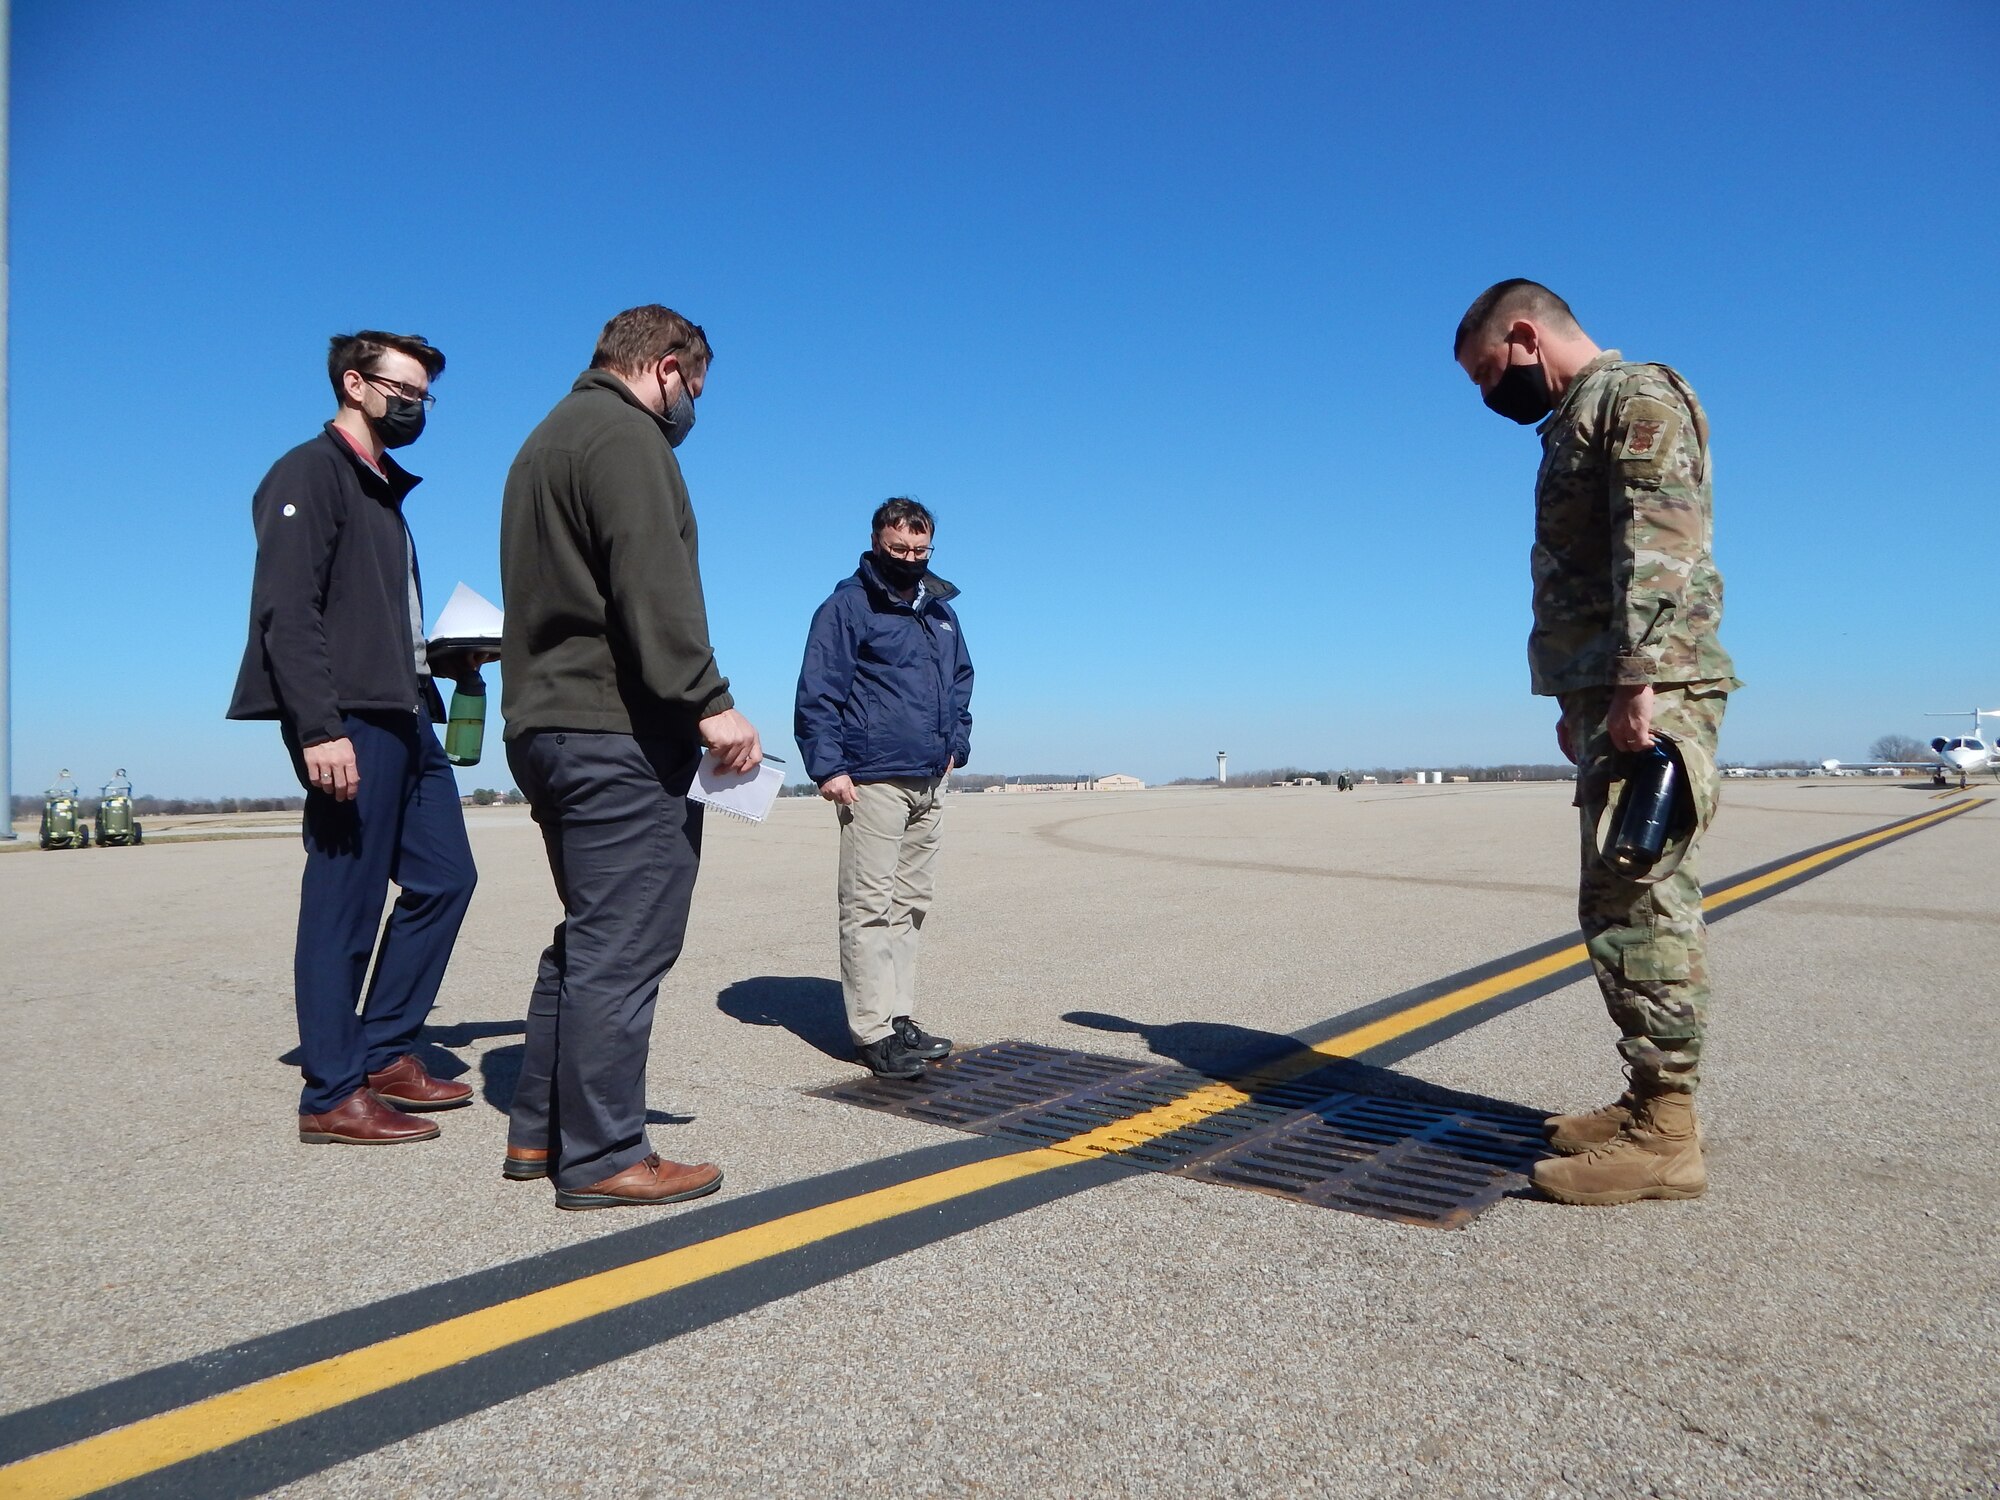 Lt. Col. Paul Fredin, commander of the 375th Civil Engineer Squadron, and 375th CES engineer Kenneth Cavanaugh (middle) talk with graduate students Kyle Collier and Cam Loyet (left to right) about water drainage on the flightline.  The students are taking the Innovating for Defense course at Washington University. They are working with Scott’s Elevate innovation team on identifying solutions to prevent future flooding of Hangar 3, which is used to house and maintain C-21 aircraft. (Photo by Christi Spargur)